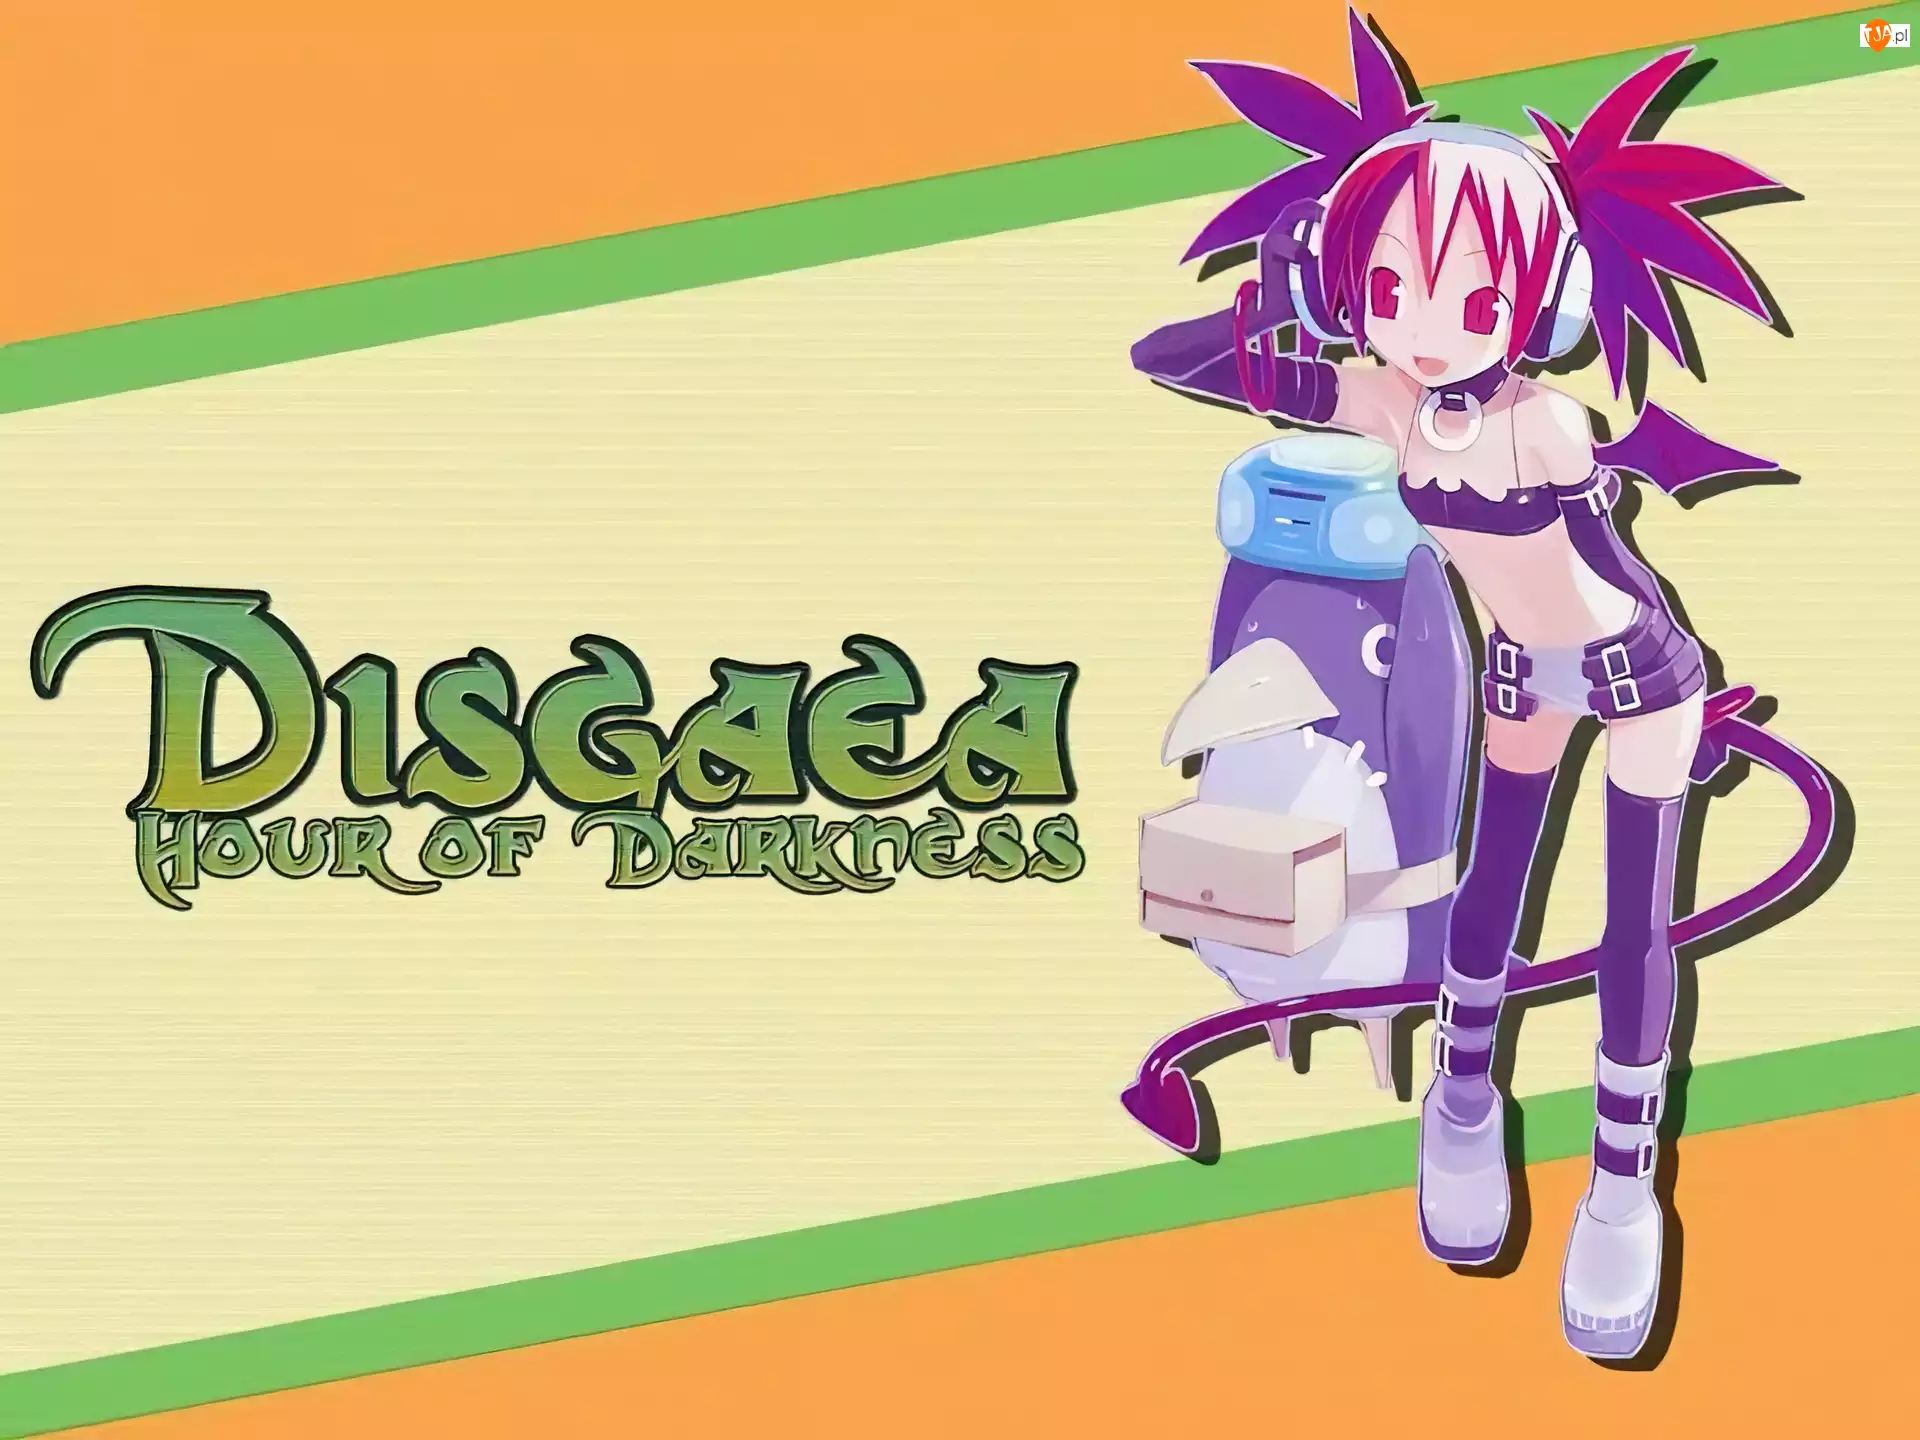 Hour Of Darkness, Disgaea